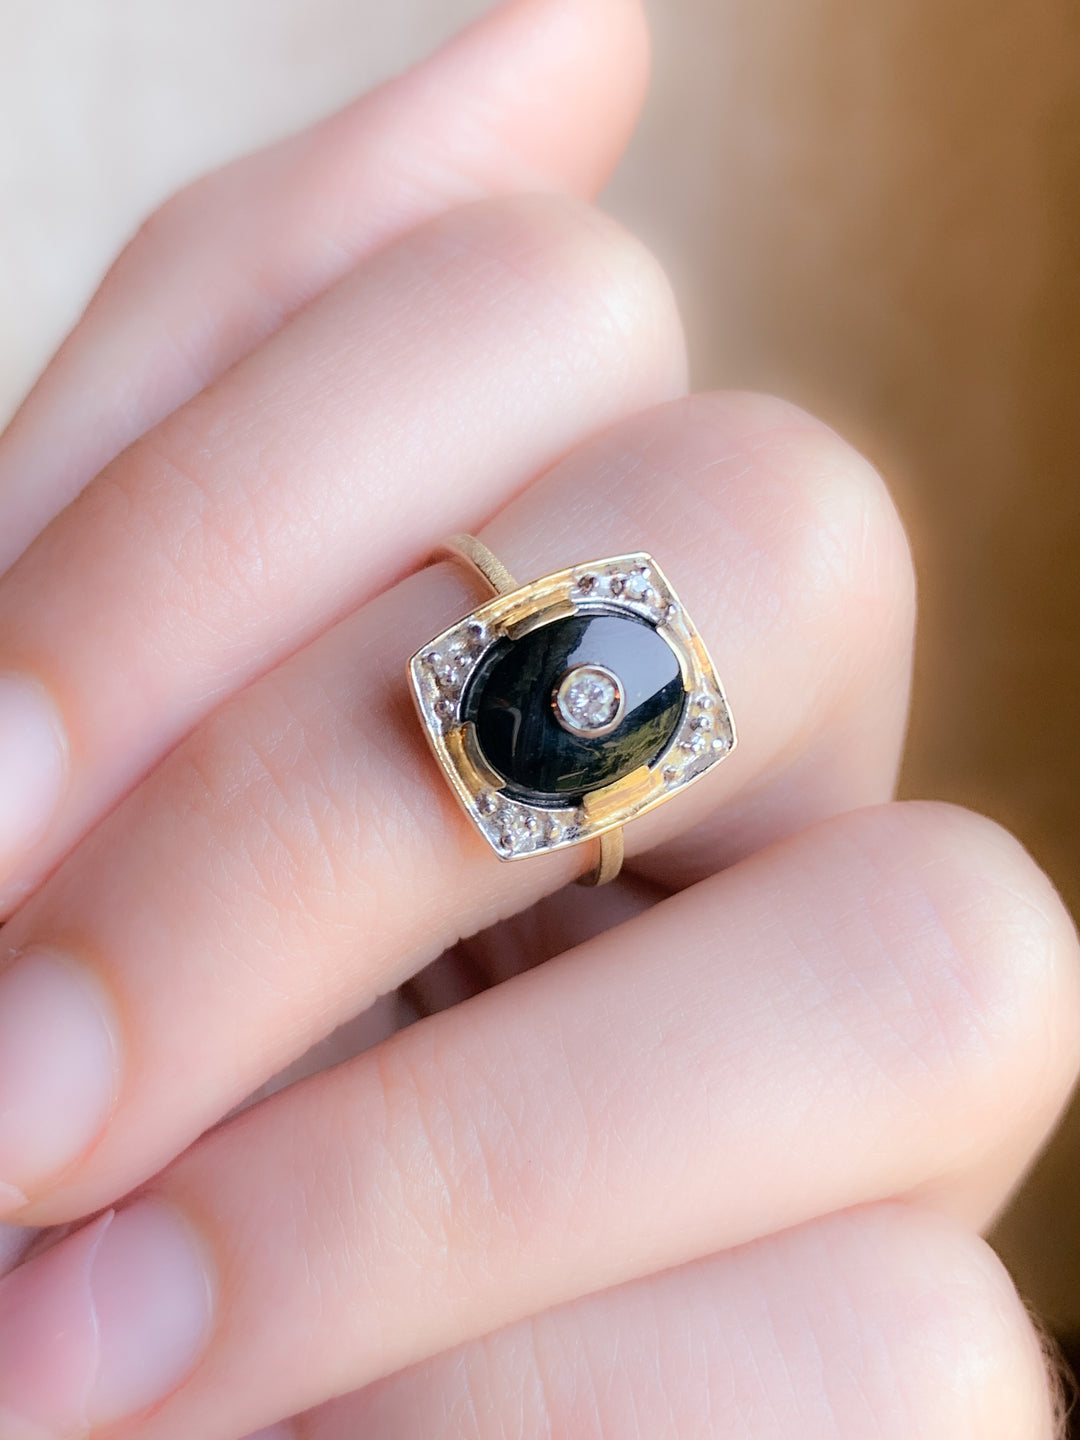 14ct Superb 1940’s Onyx and Diamond Ring & Gold Filled Split Ring